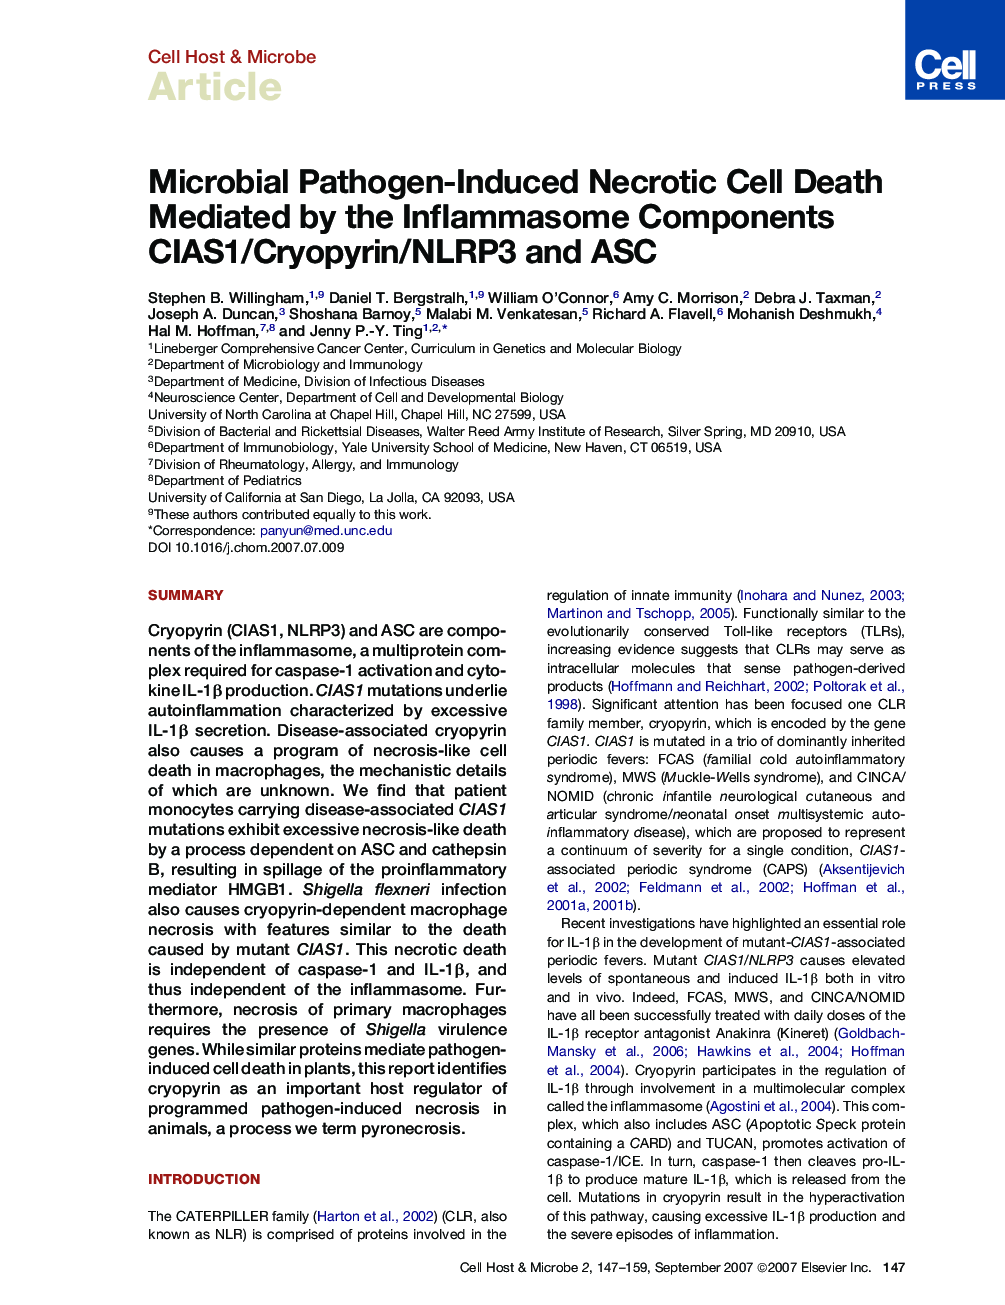 Microbial Pathogen-Induced Necrotic Cell Death Mediated by the Inflammasome Components CIAS1/Cryopyrin/NLRP3 and ASC